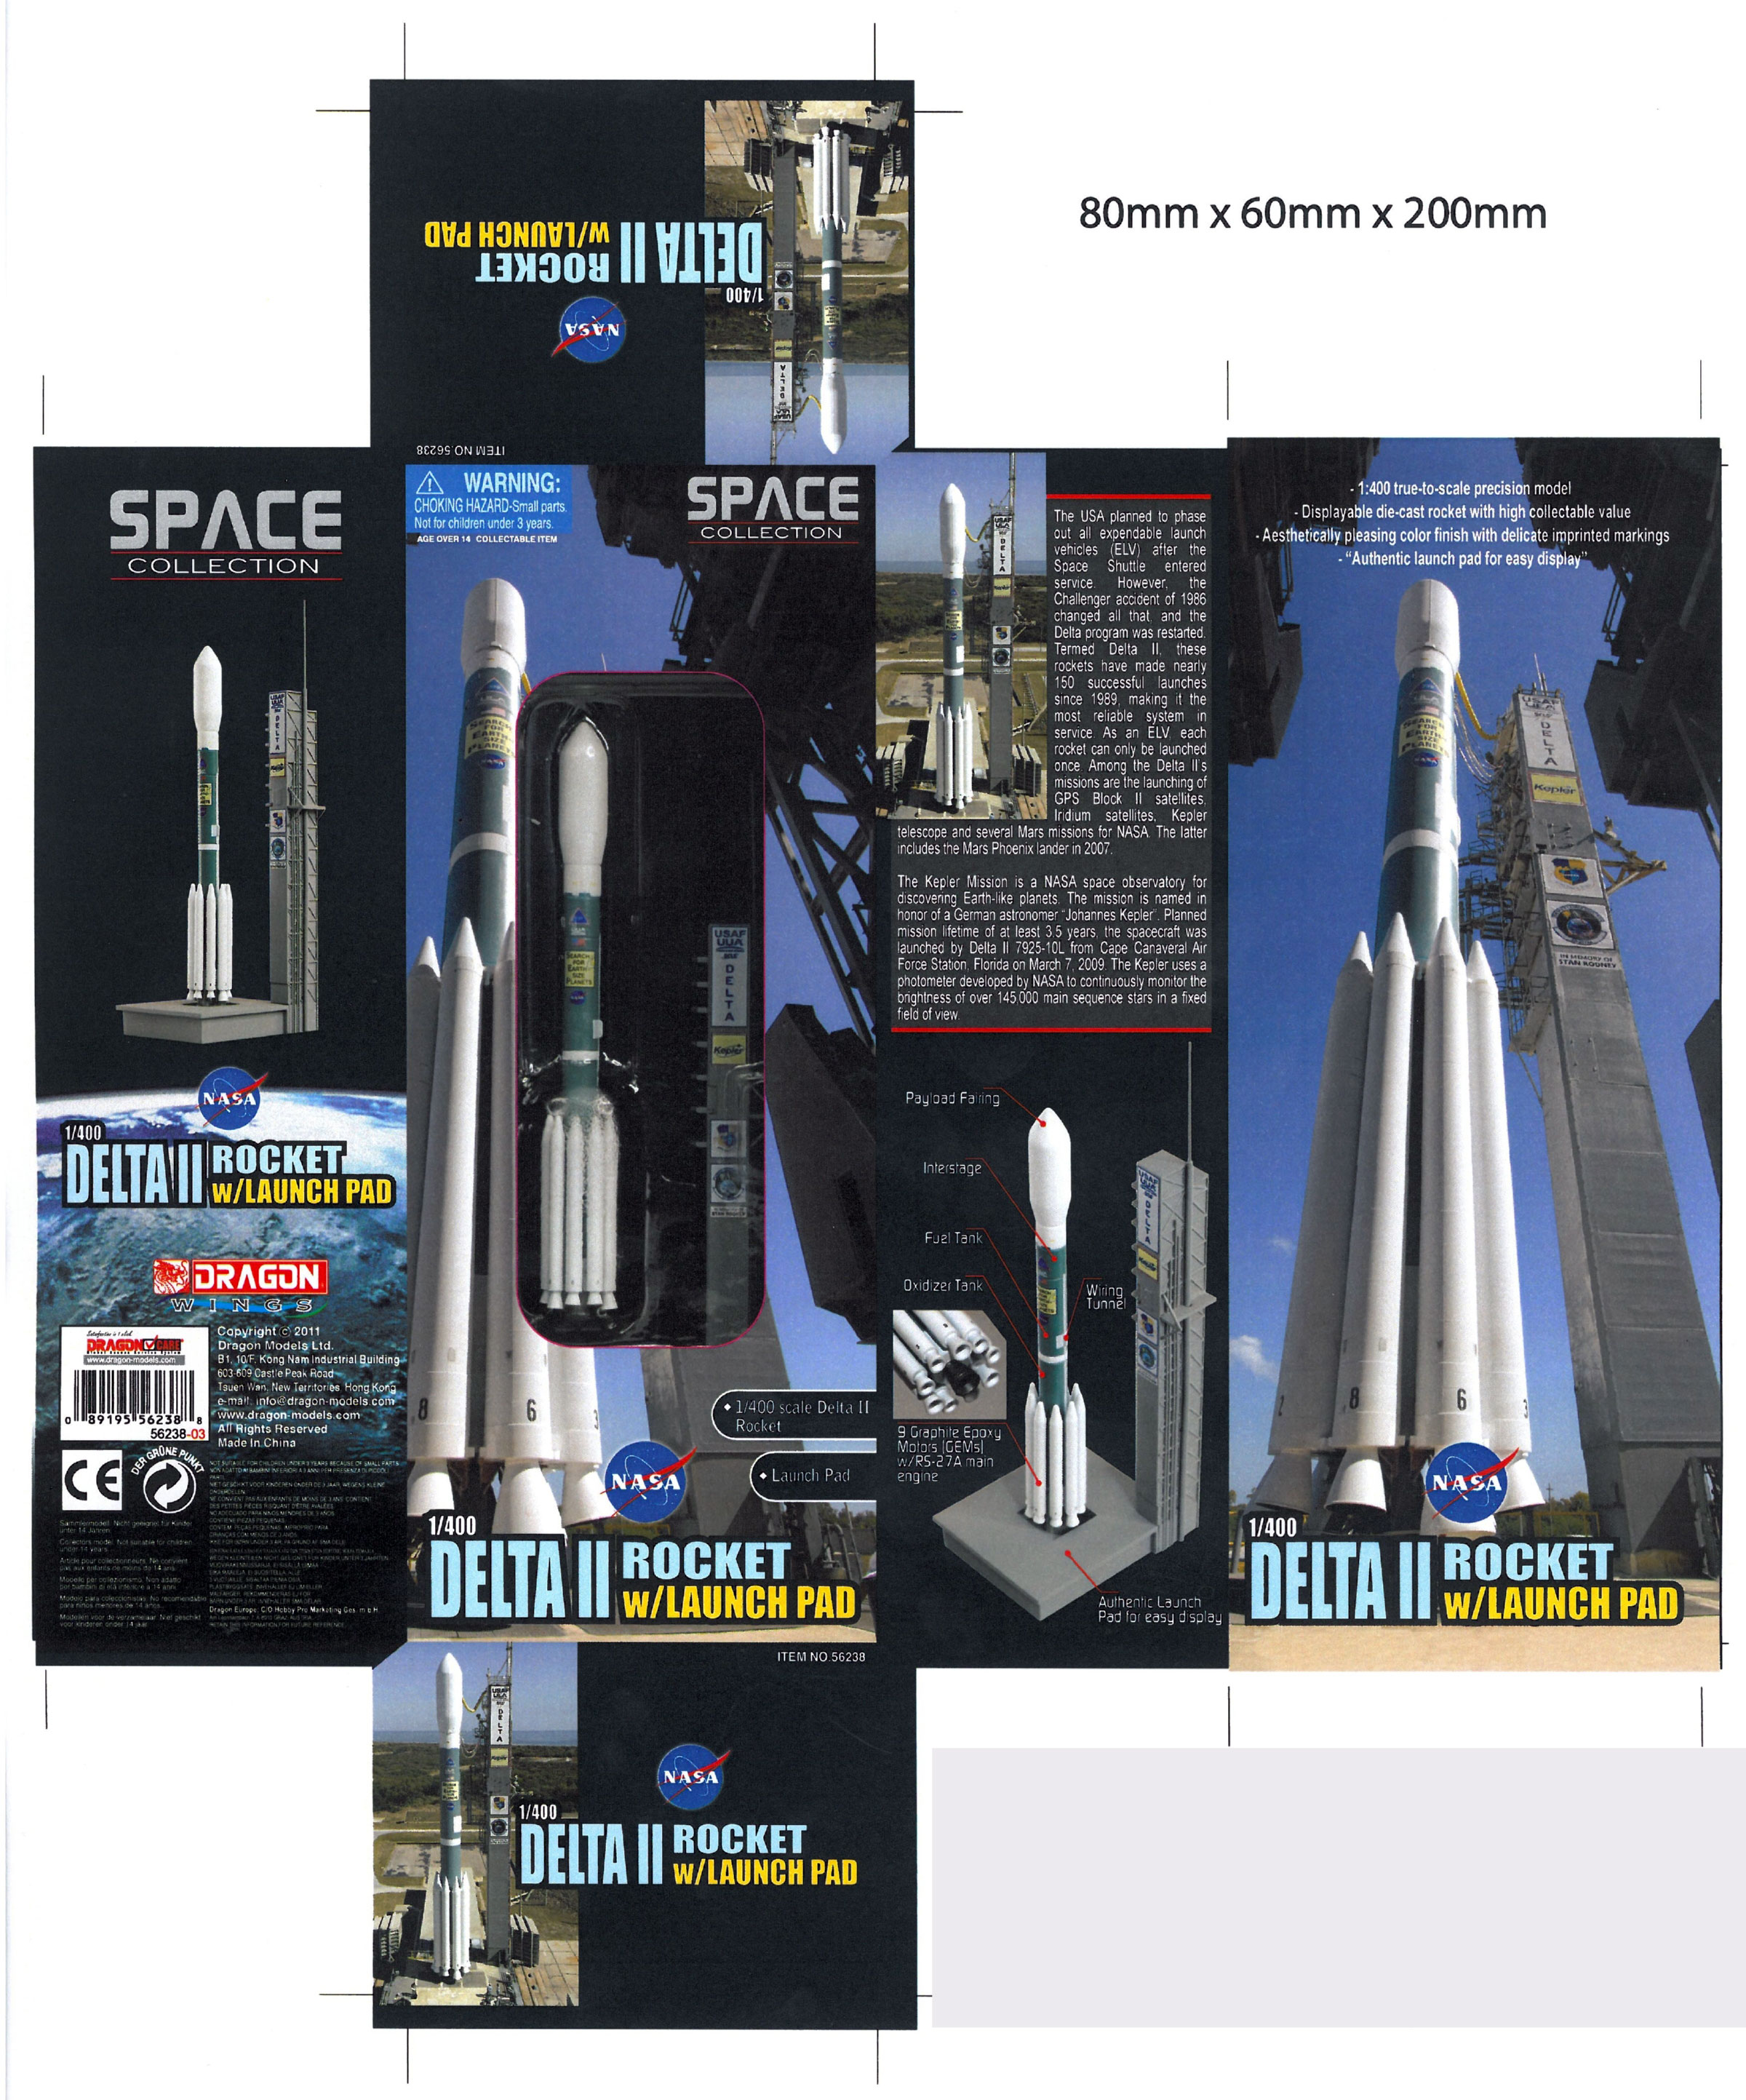 Dragon Wings 1:400 Delta II with launch pad - collectSPACE: Messages